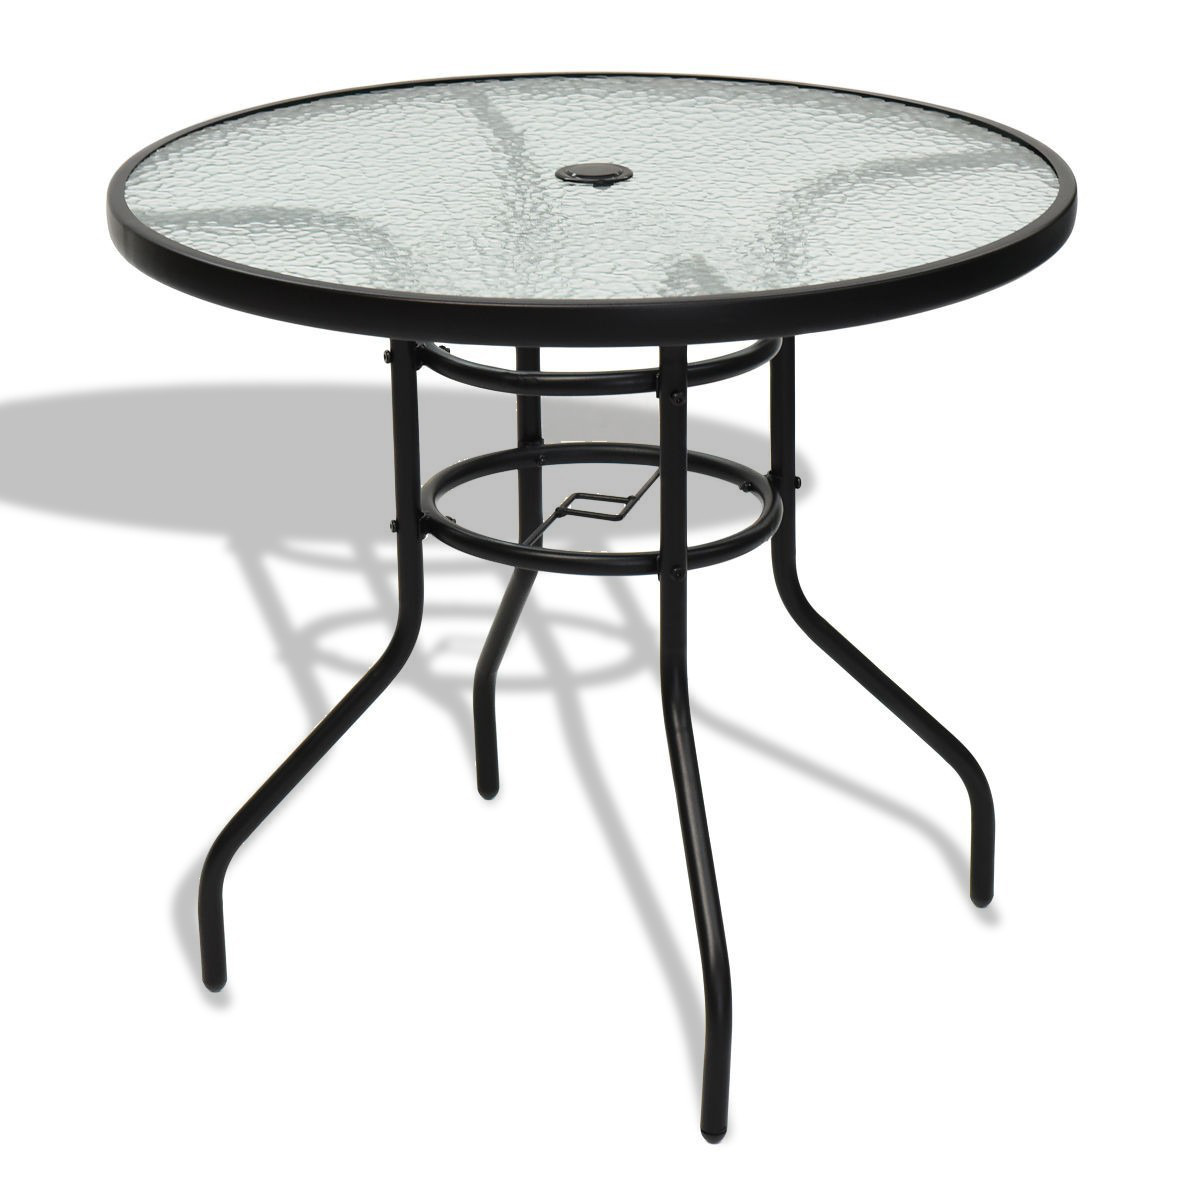 Goorabbit Outdoor Glass Table 32" Outdoor Bistro Table Patio Dining Table Round Side Table Coffee Table Furniture with Umbrella Hole, Metal Frame Water Ripple Glass Top(Black) - image 5 of 8